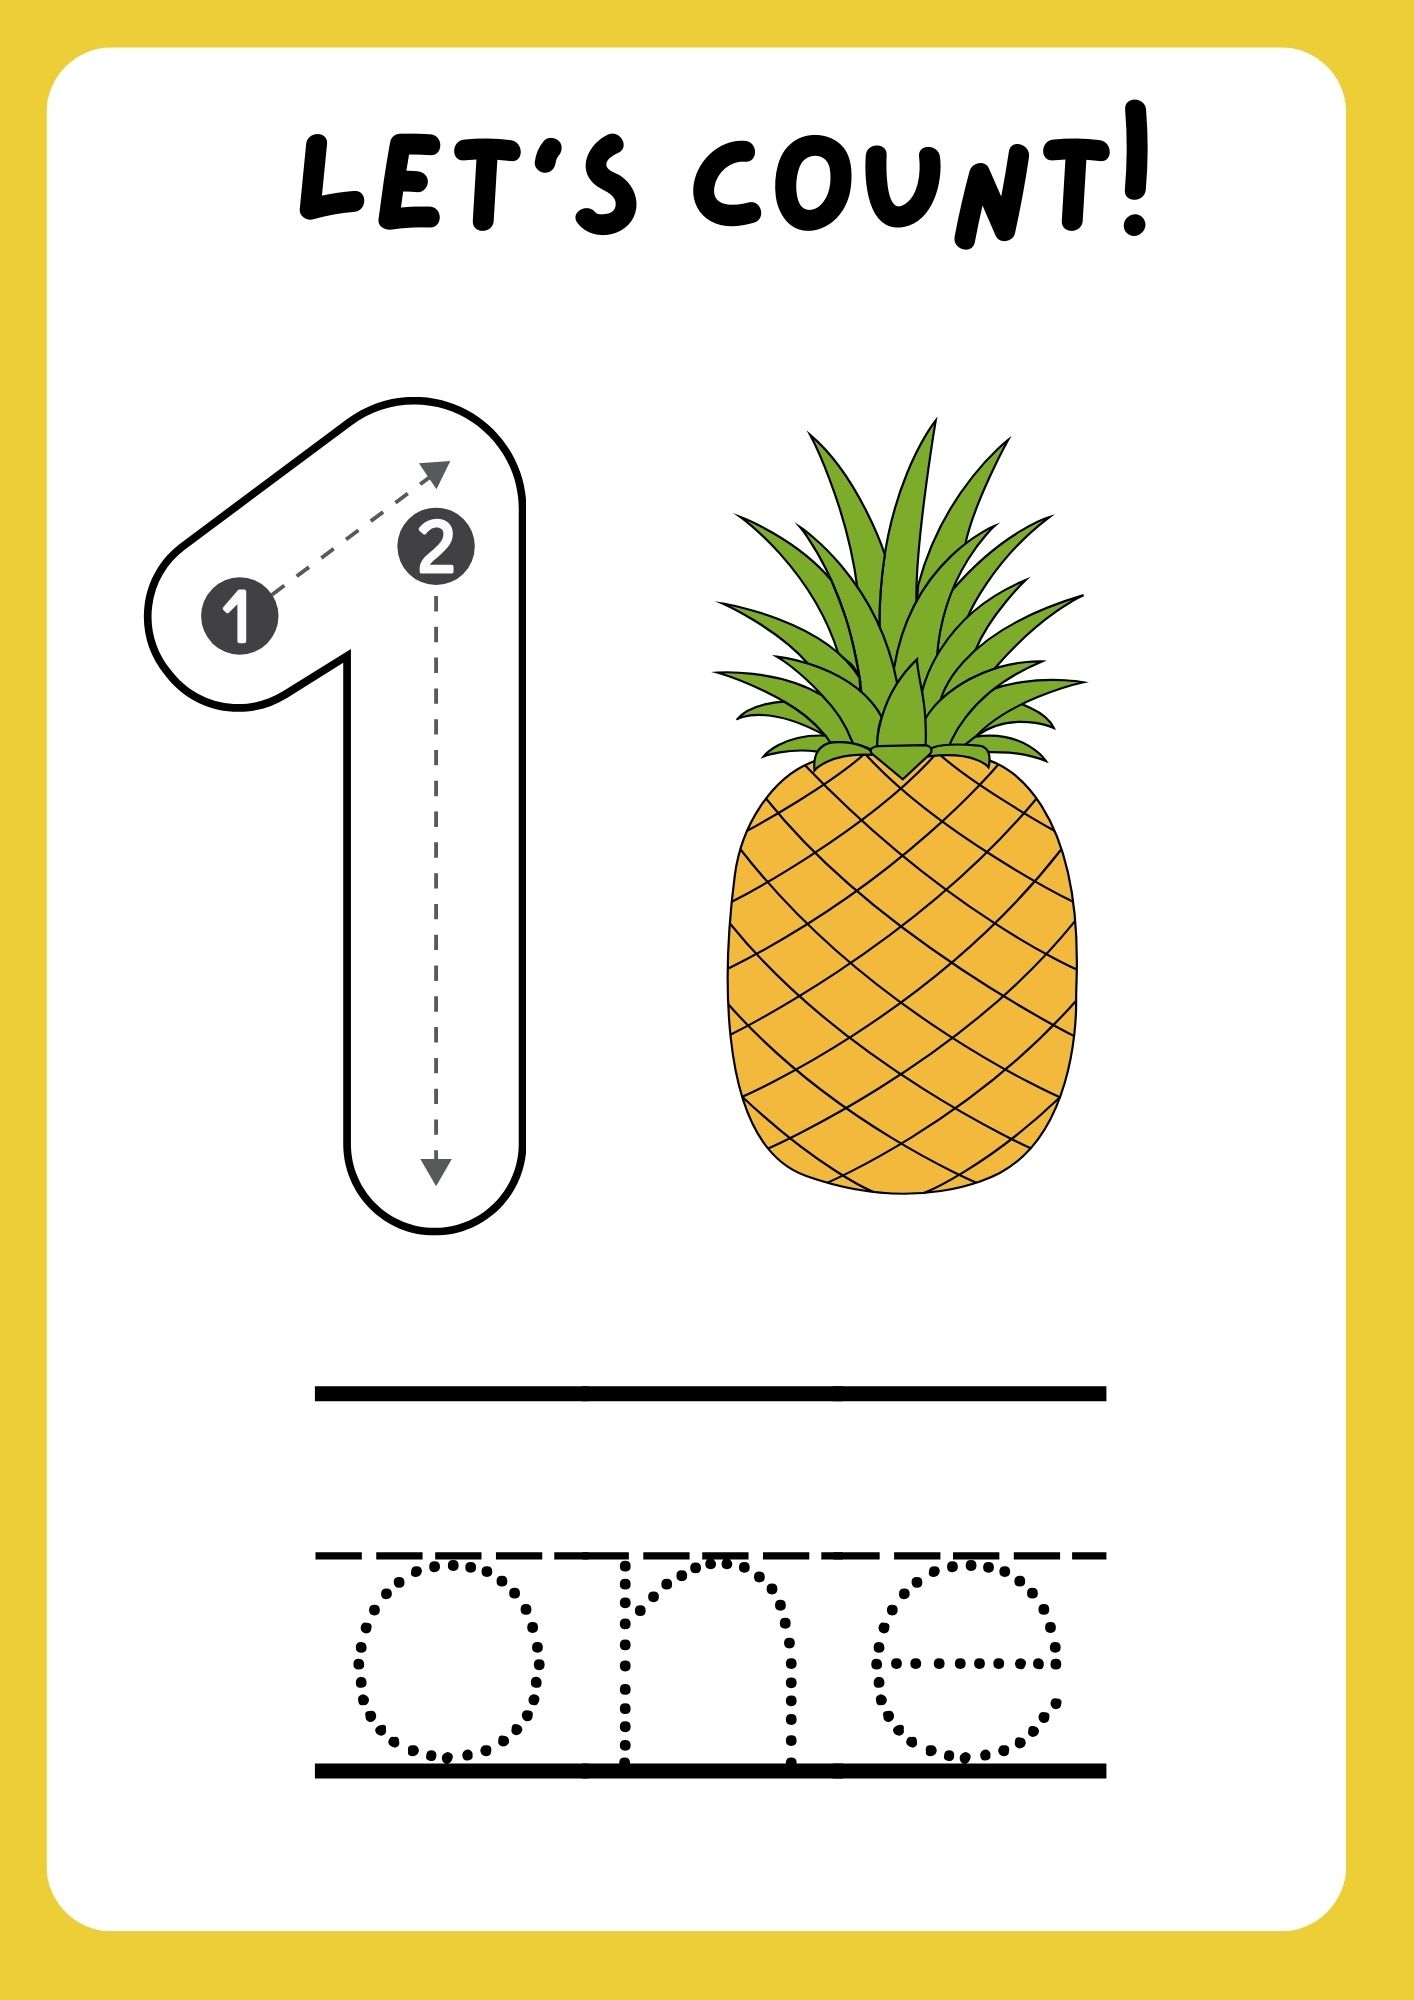 Worksheet for Counting and Writing Numbers 1-10